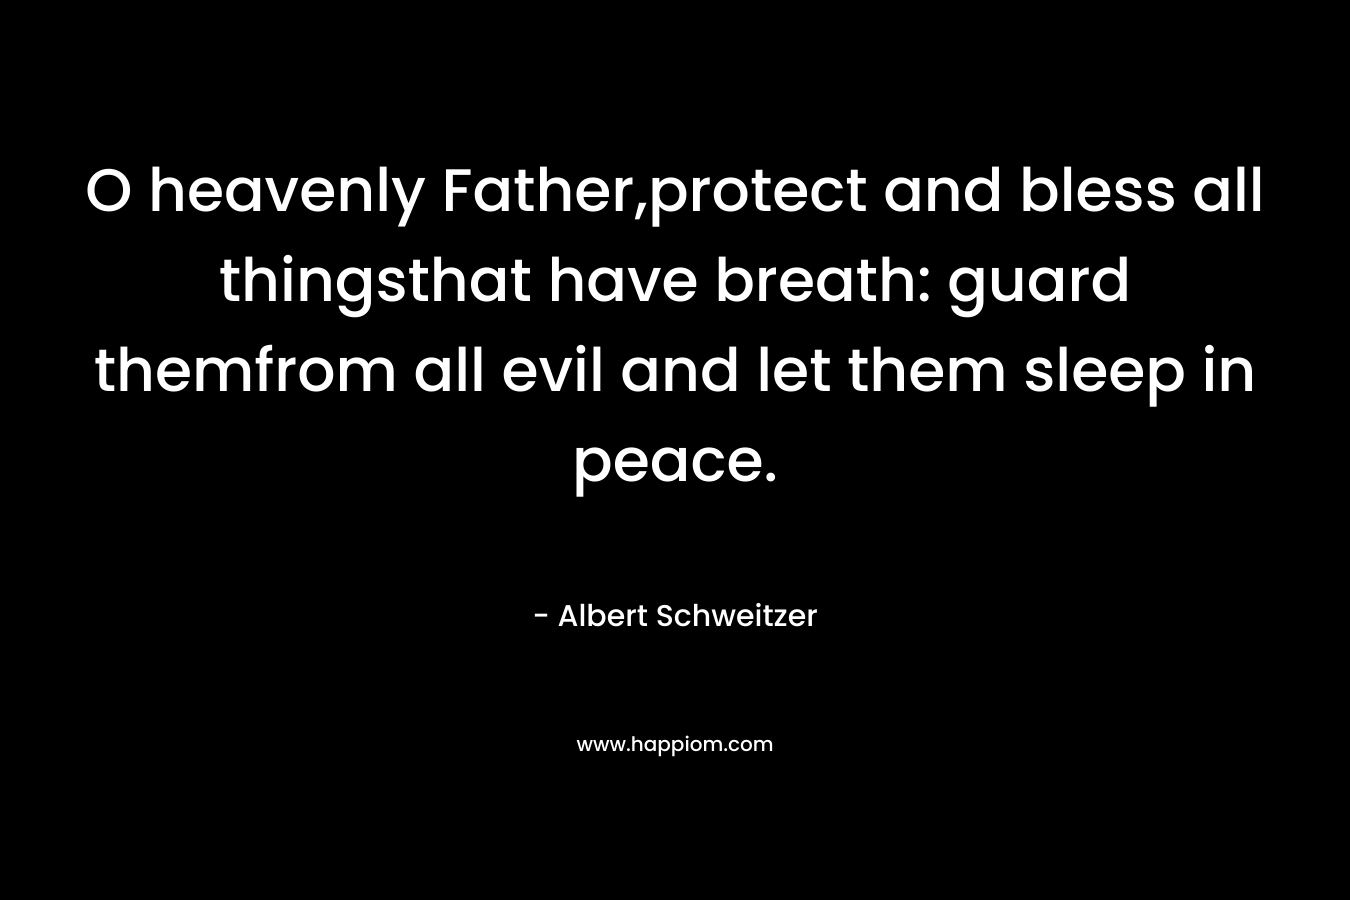 O heavenly Father,protect and bless all thingsthat have breath: guard themfrom all evil and let them sleep in peace. – Albert Schweitzer